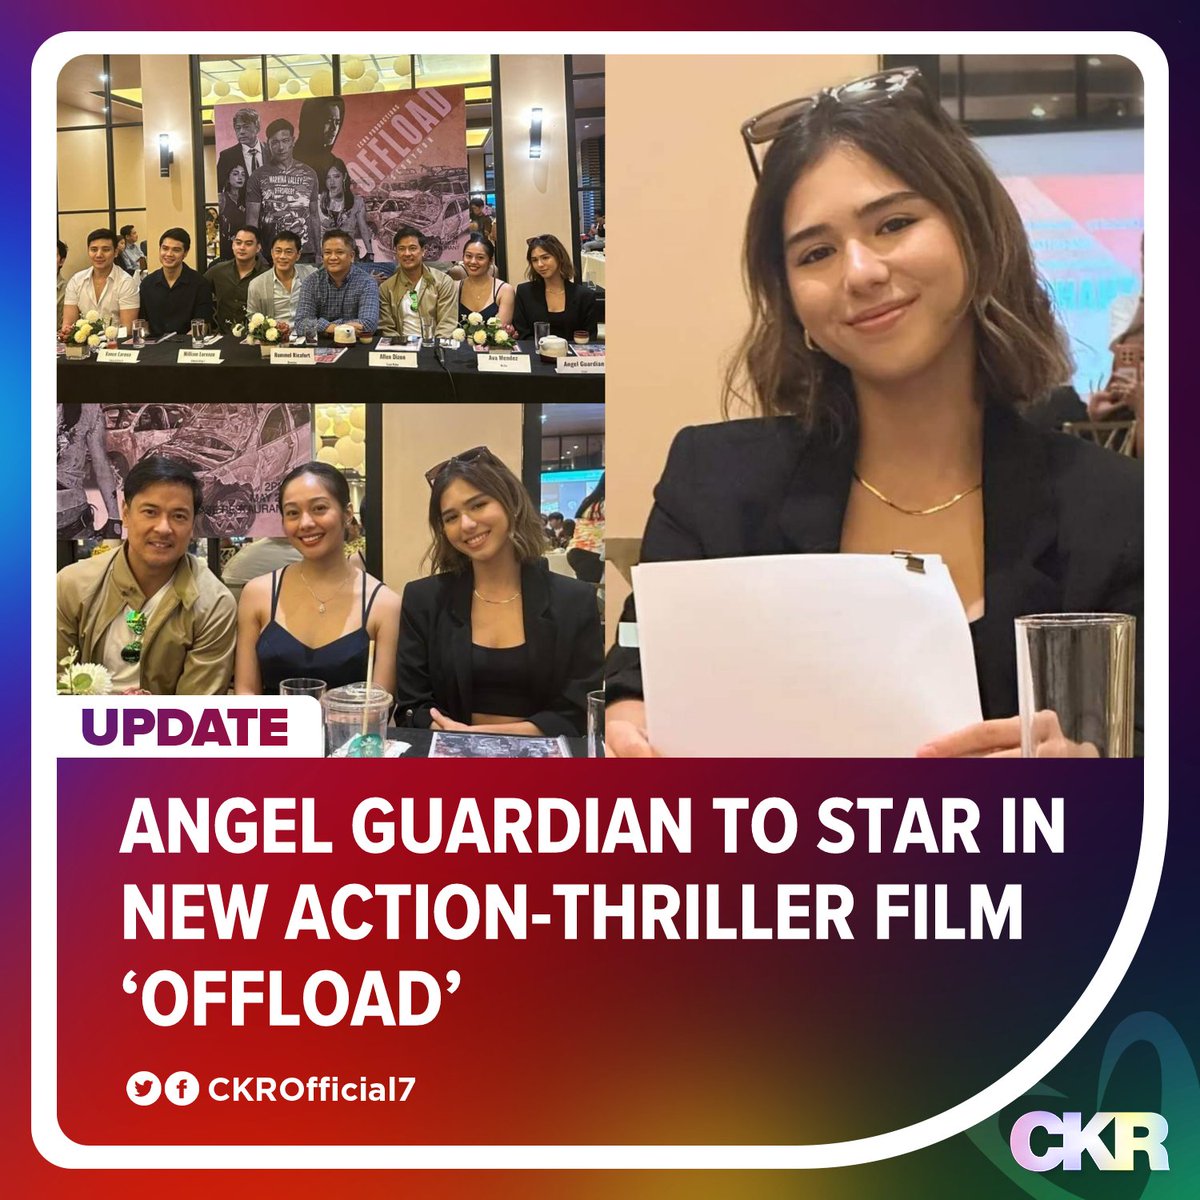 UPDATE: Kapuso actress Angel Guardian is set to star in the action-thriller movie ‘Offload,’ with Allen Dizon, written and directed by Rommel C. Ricafort.

Other cast members include William Lorenzo, Ava Mendez, Vance Lacerna, Andrew Gan, Ayeesha Cervantes, Rap Robes, and Gio…